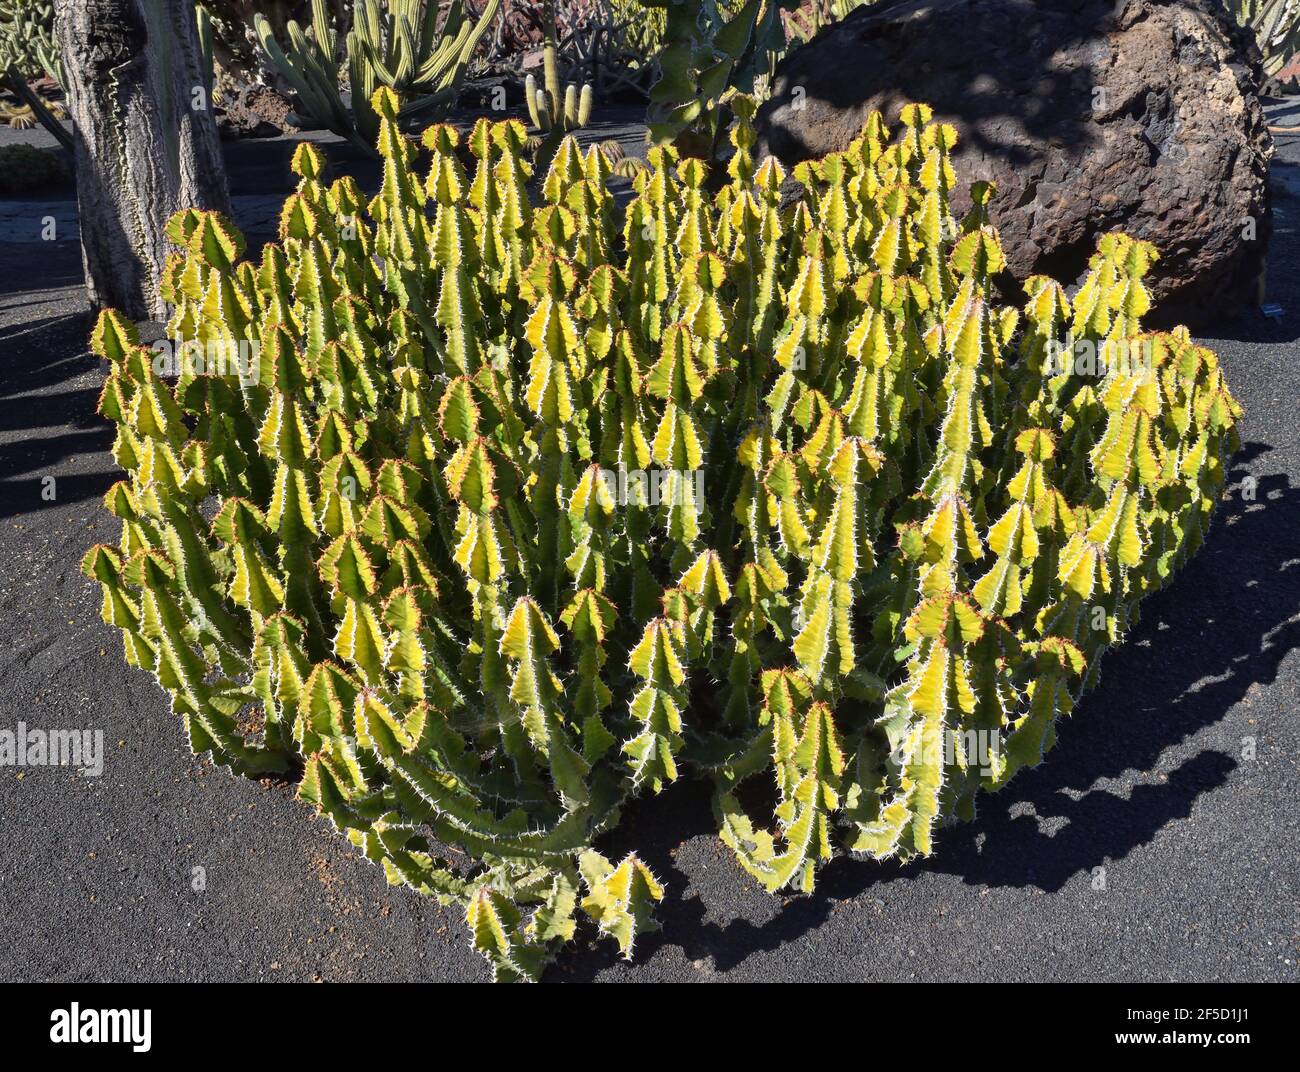 Native to the Canary Islands. Also called Hercules Club, Canary Candelabra Spurge, Spanish Caron.  The plant symbol of Gran Canaria Stock Photo